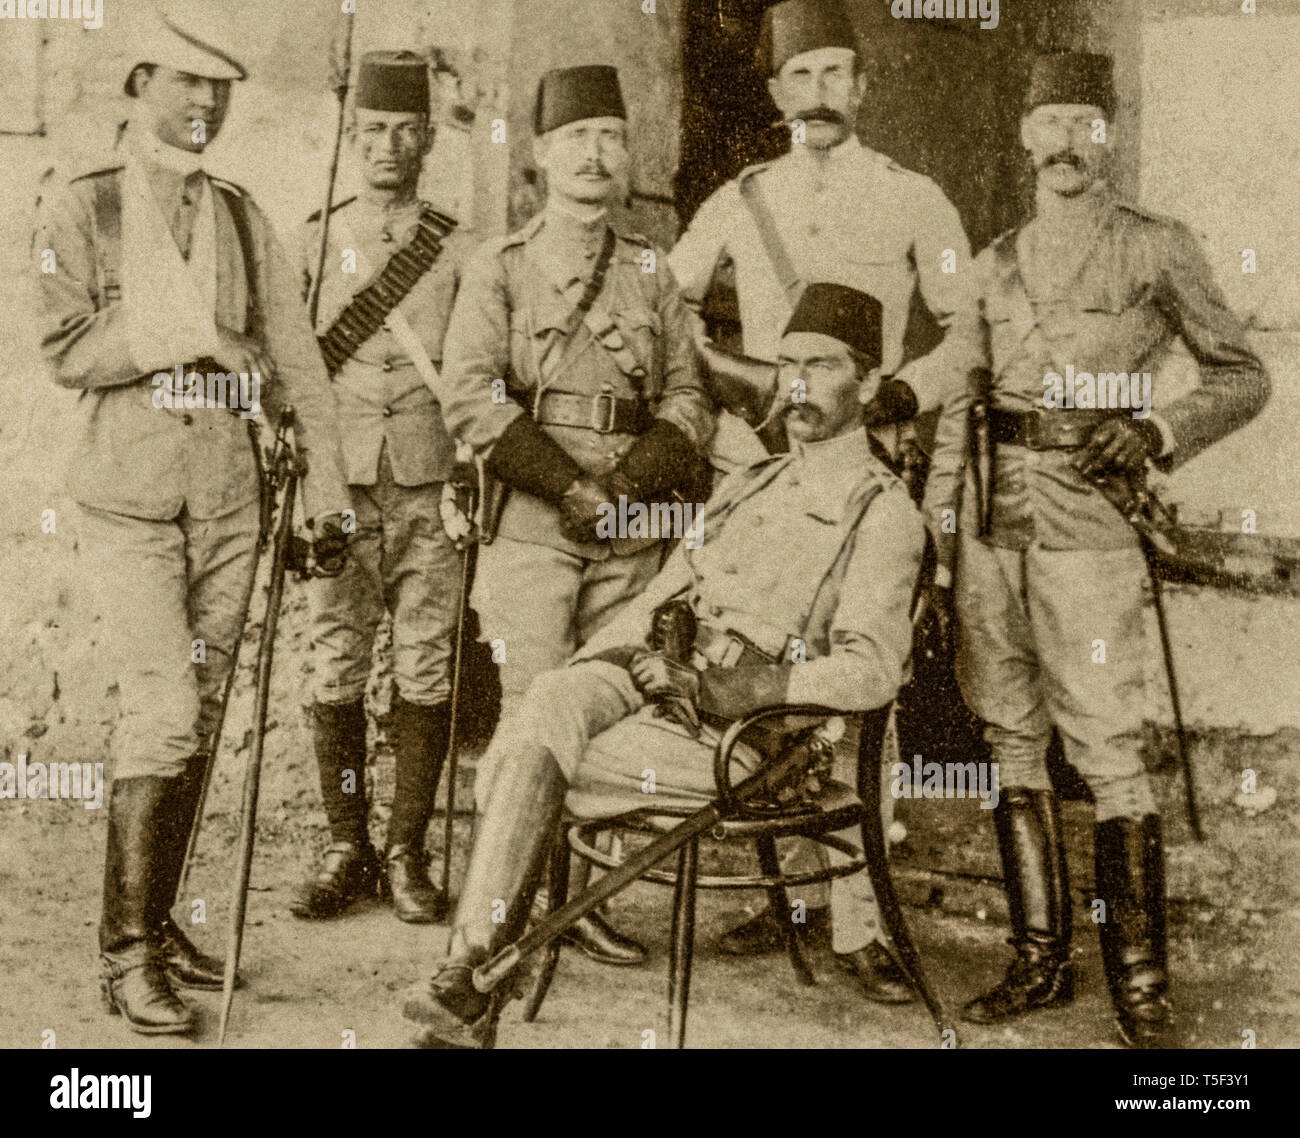 Mahdist war  ( 1881 - 1899)  -Kichener (seated) with a group of English officers of the Egyptian weapon and an exponent of the Egyptian Cavalry troop (Second from the left). This photograph was taken after the battle of Gemaizeh in 1888, in which the young officer on the left was allegedly injured. Stock Photo